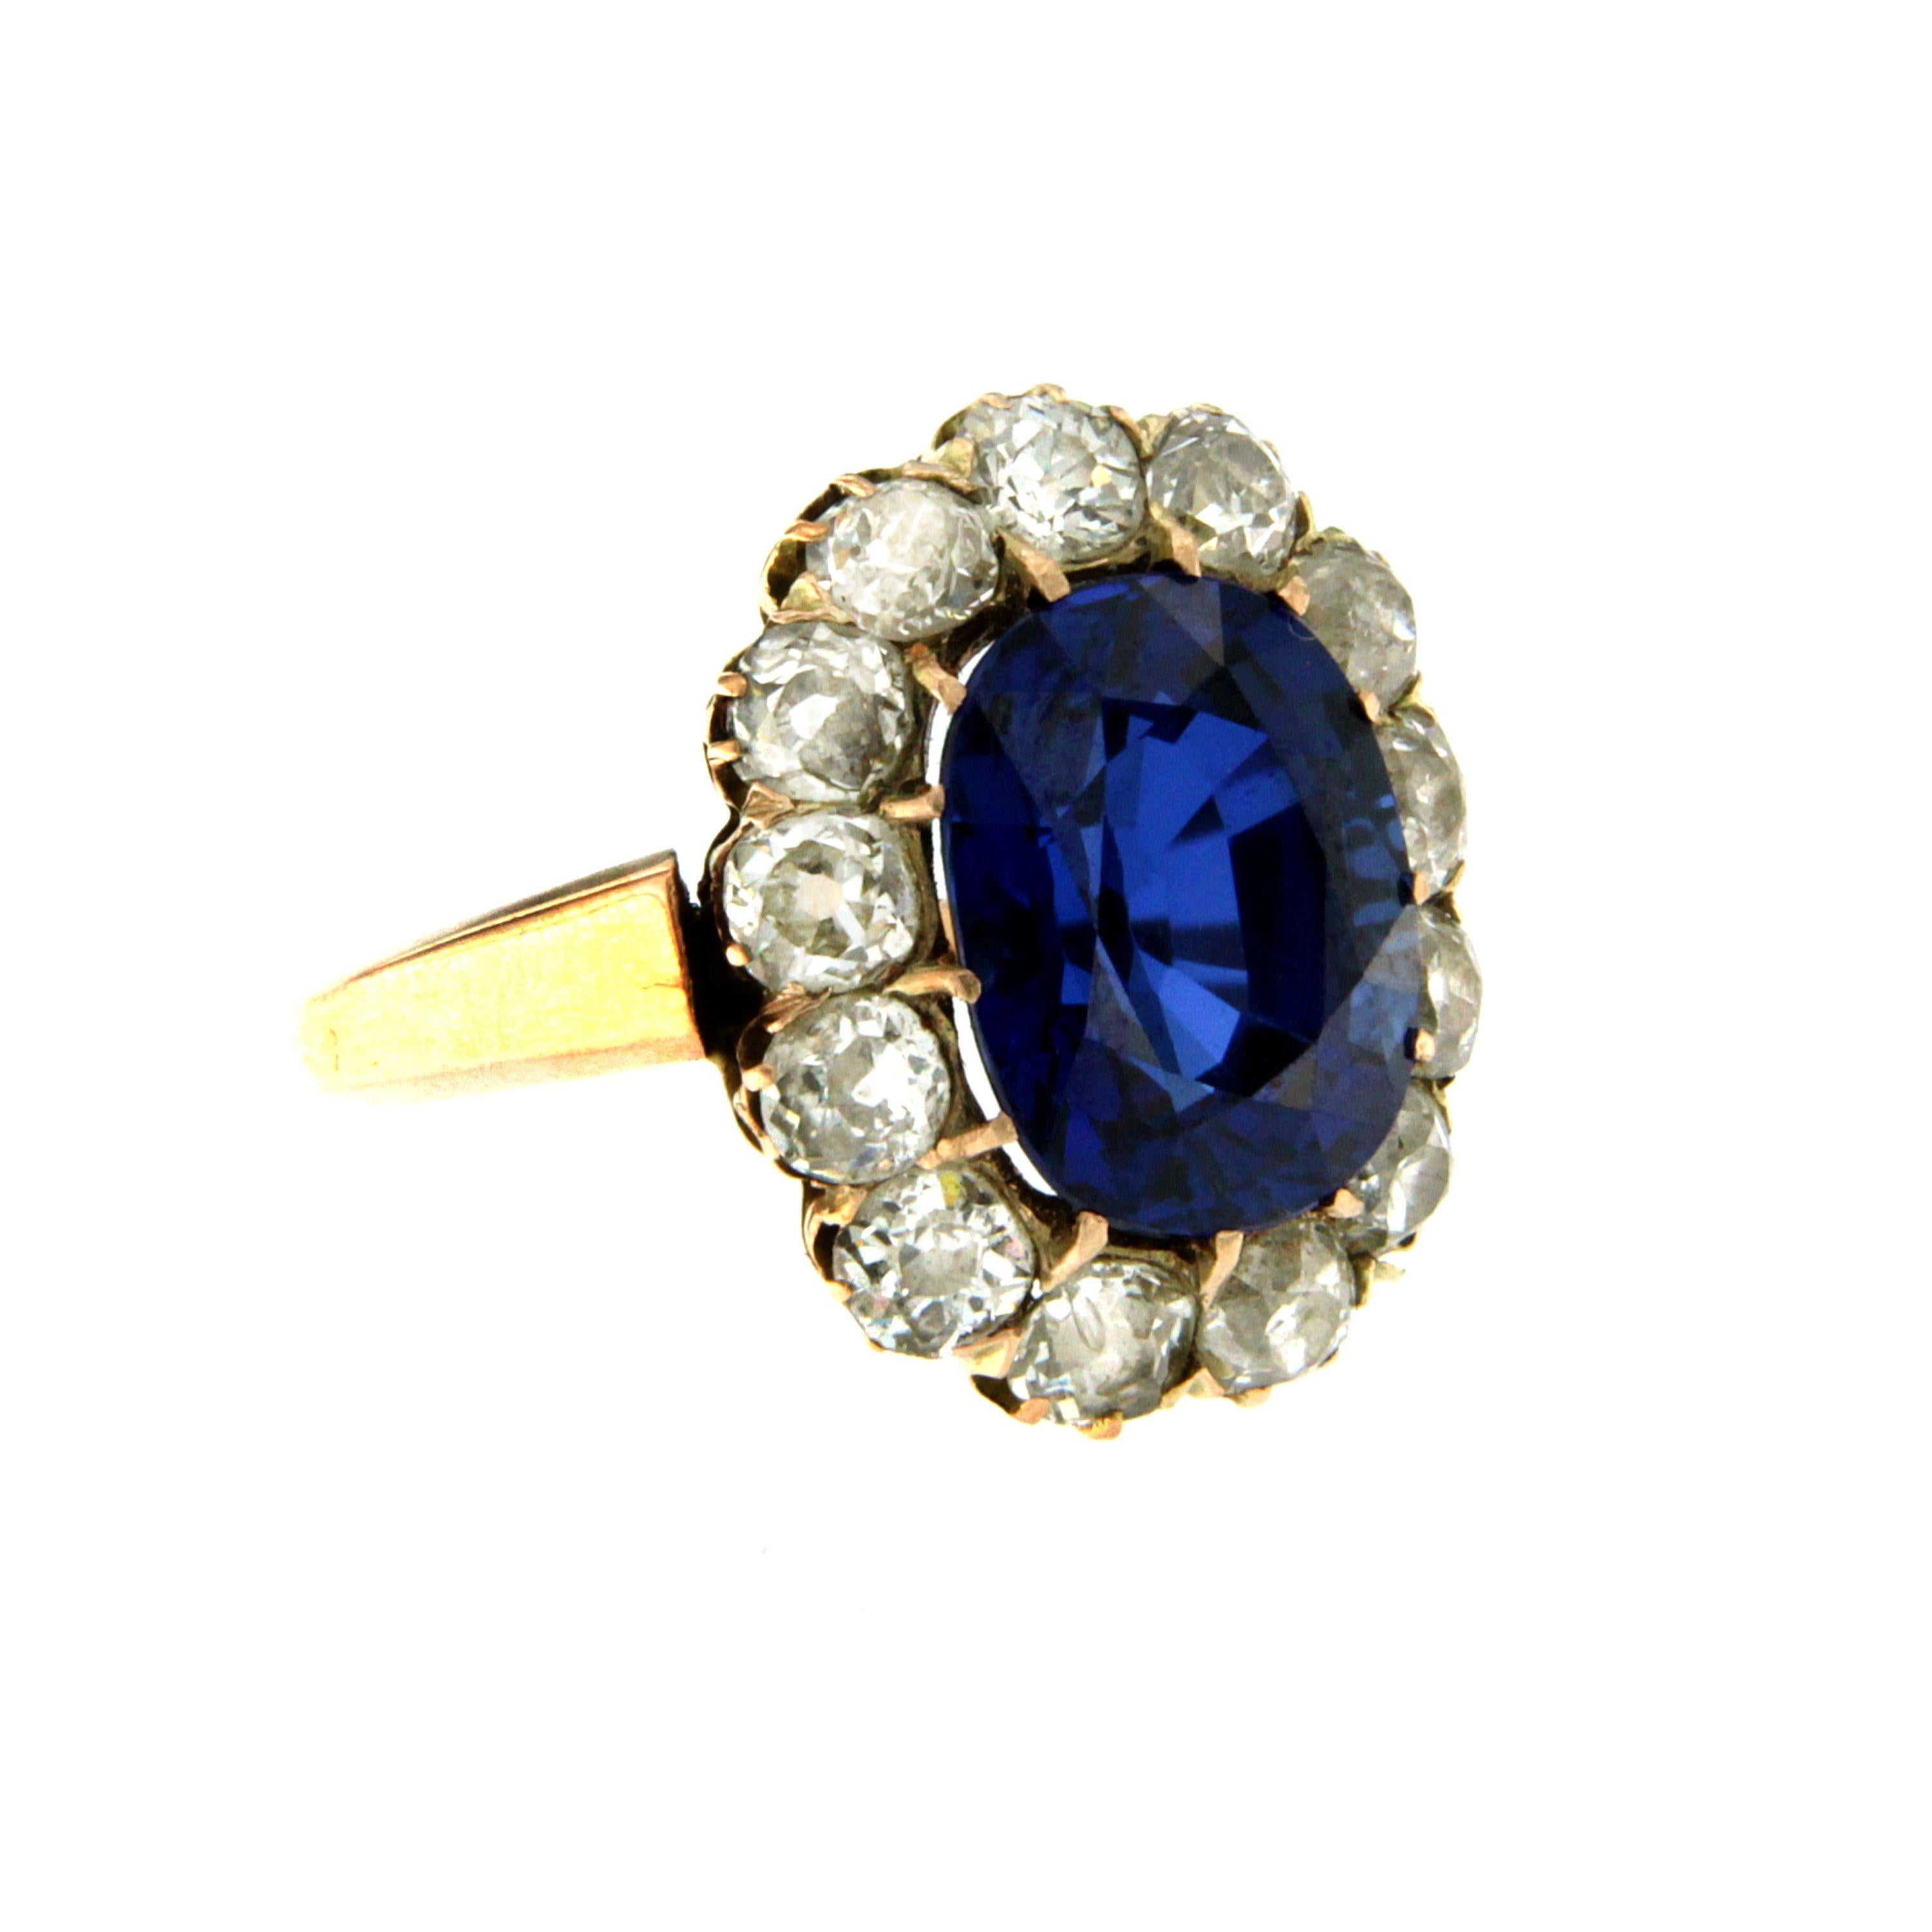 Antique 18K rose Gold Verneuil Synthetic Sapphire and Diamond ring. 
The cluster style ring is centered with an approximately 6 carat royal blue oval synthetic sapphire, see note below, accented by 13 rose cut diamonds weighing approx. 3 carats